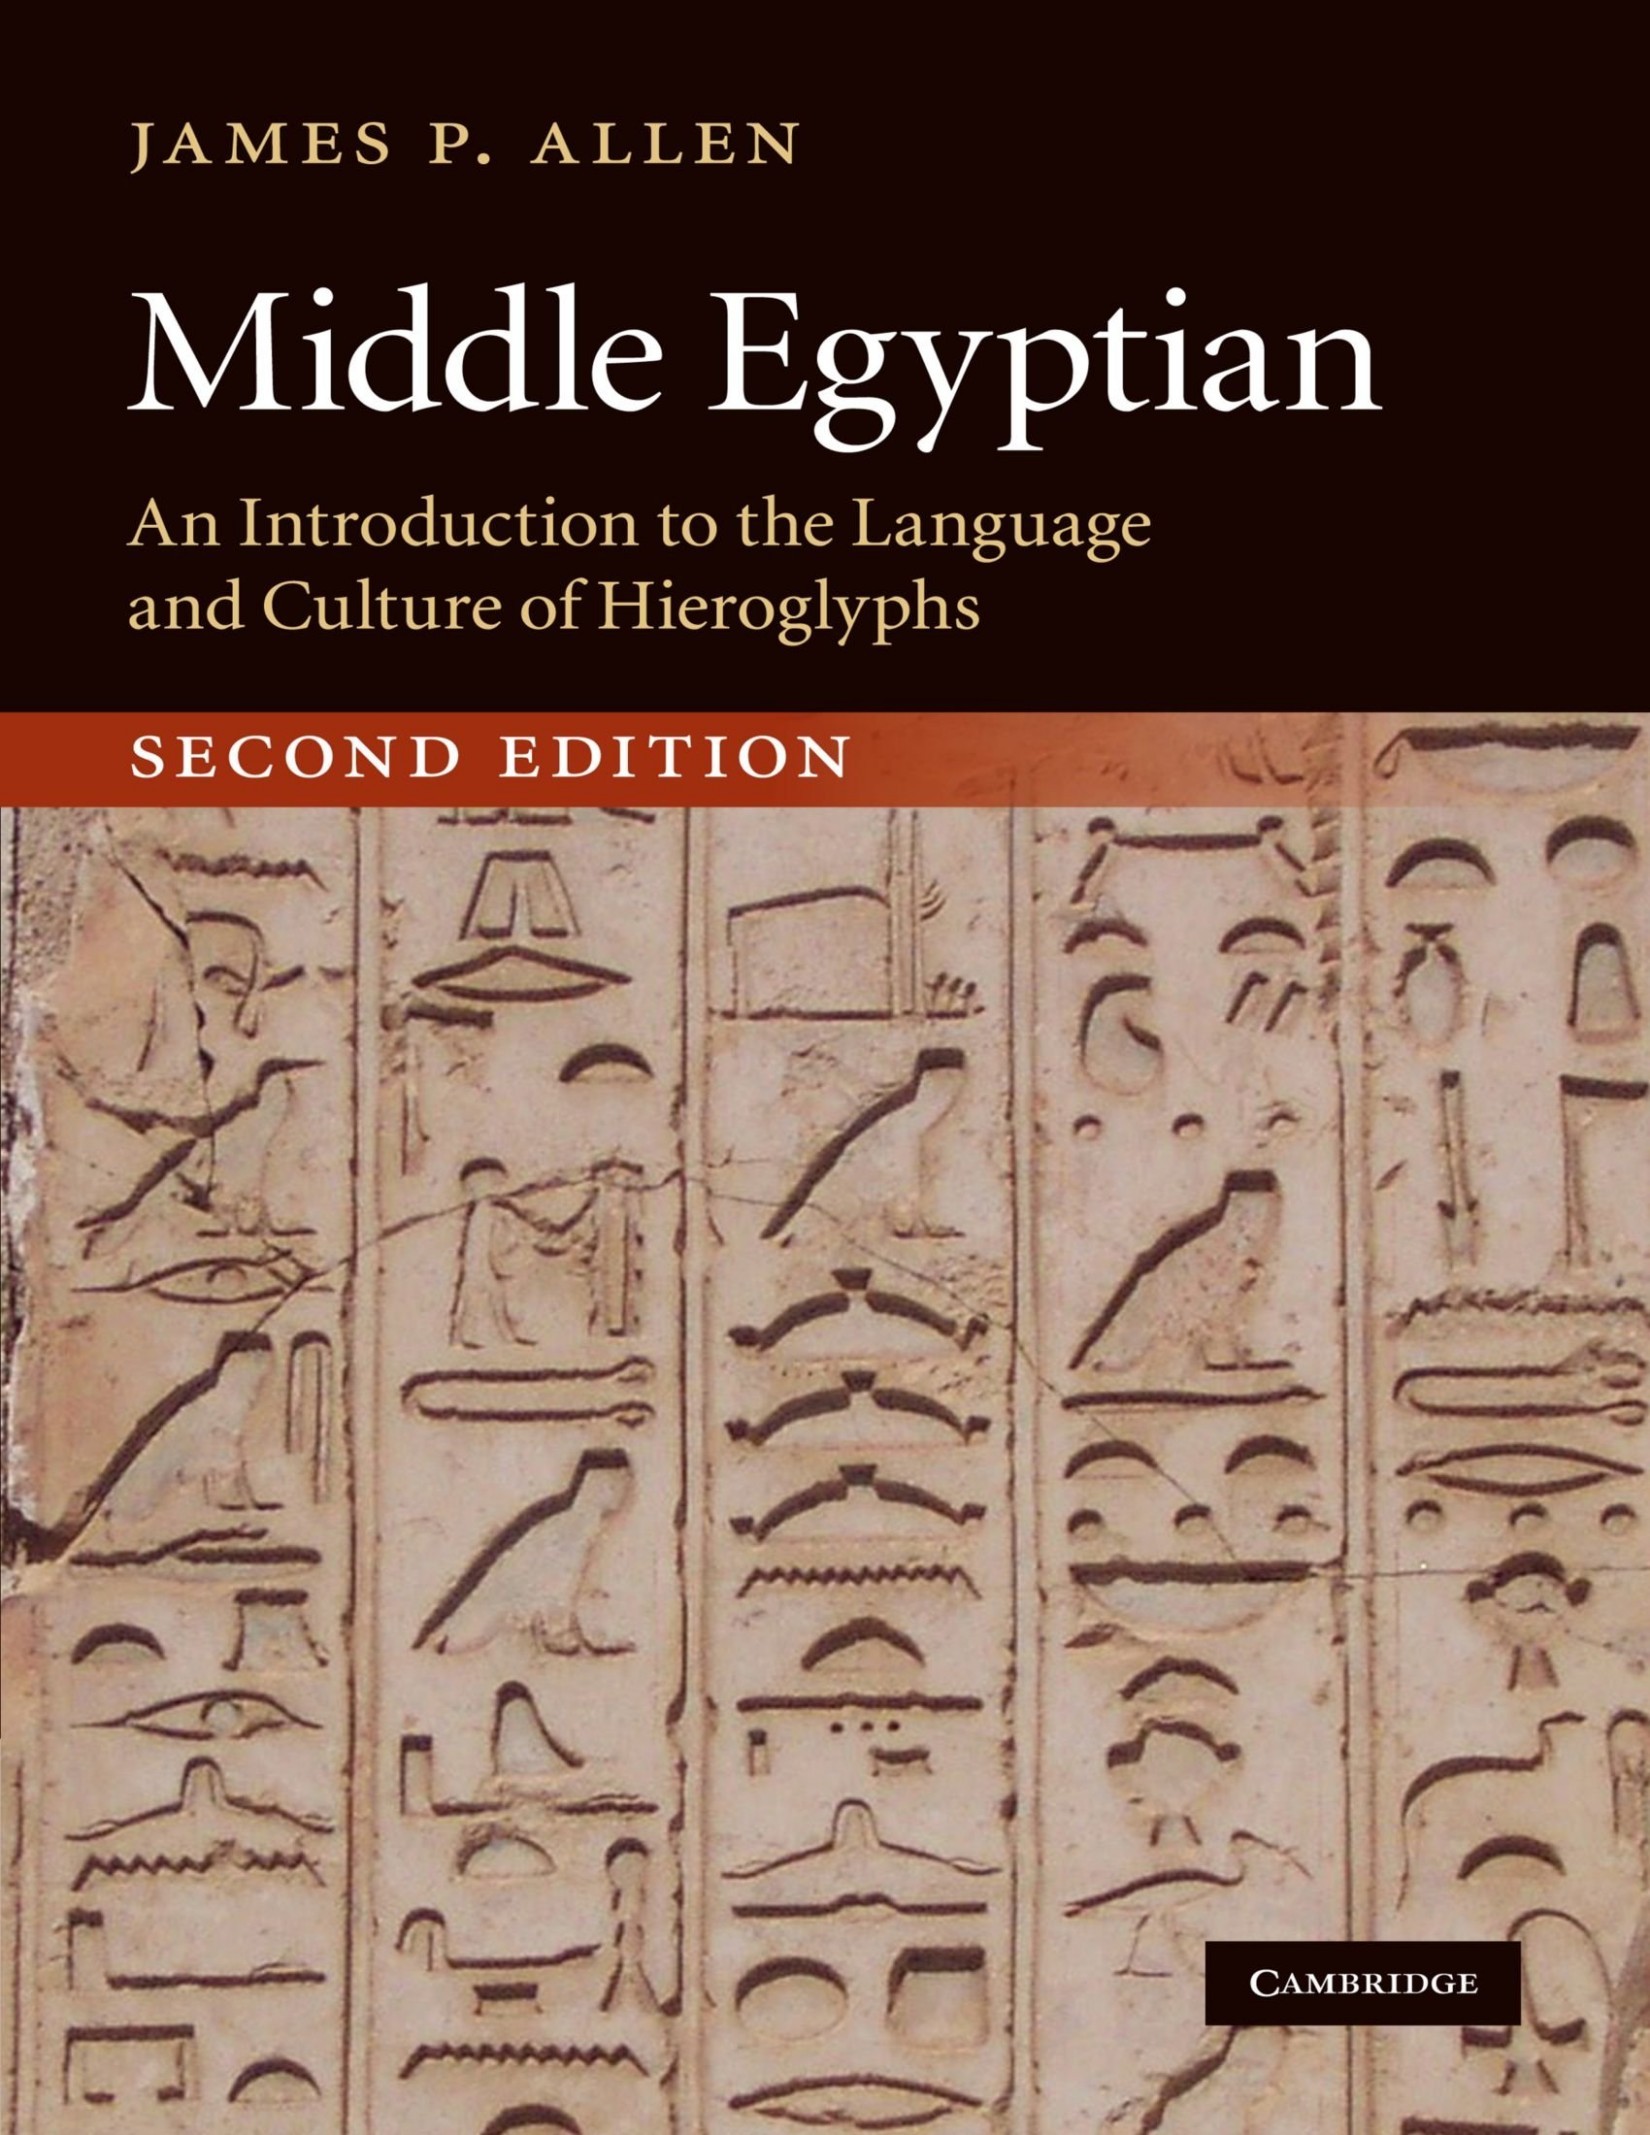 Middle Egyptian: An Introduction to the Language and Culture of Hieroglyphs - 2nd. Ed.